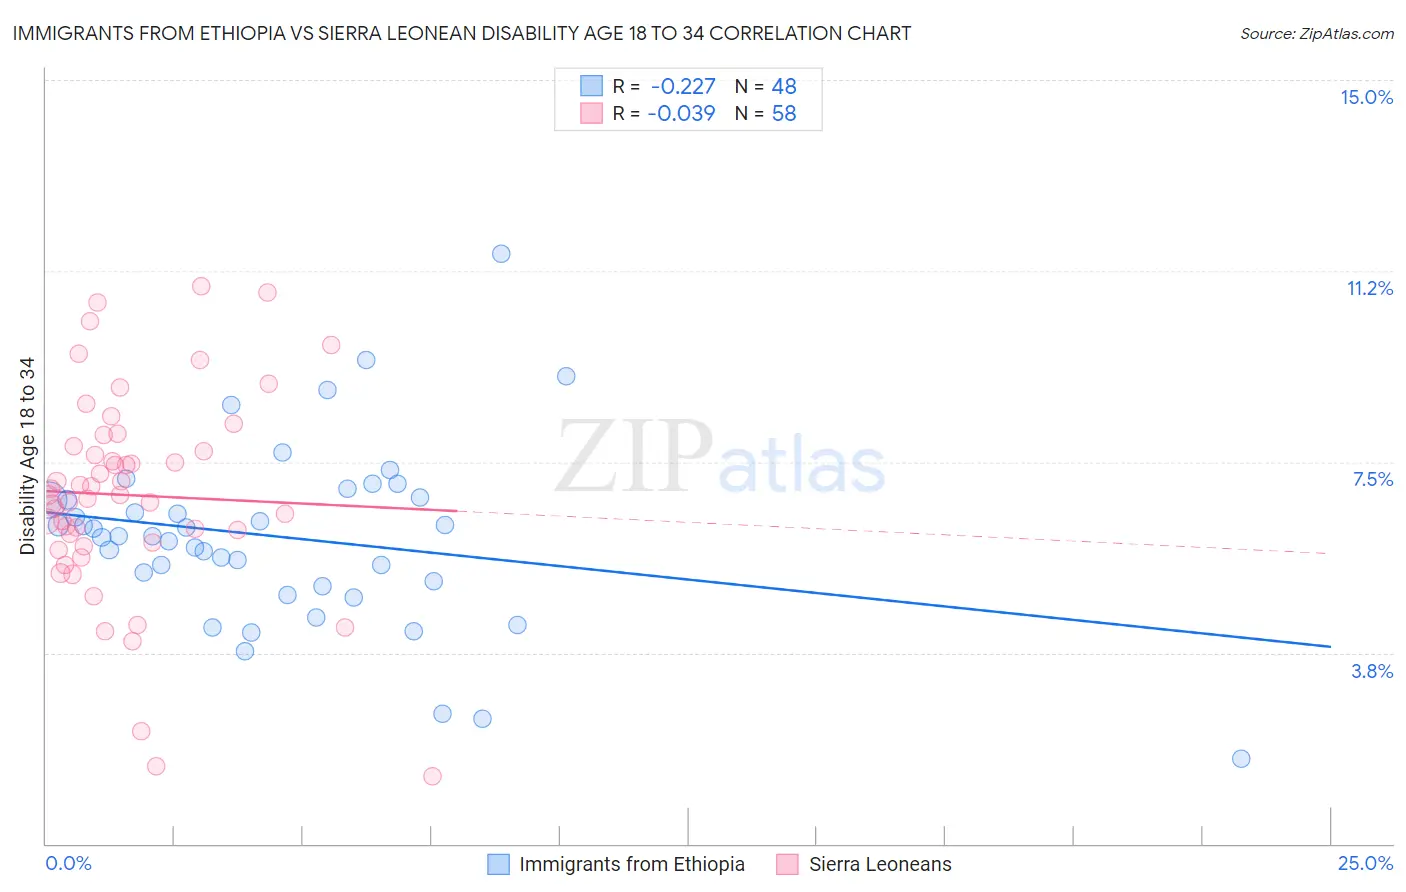 Immigrants from Ethiopia vs Sierra Leonean Disability Age 18 to 34